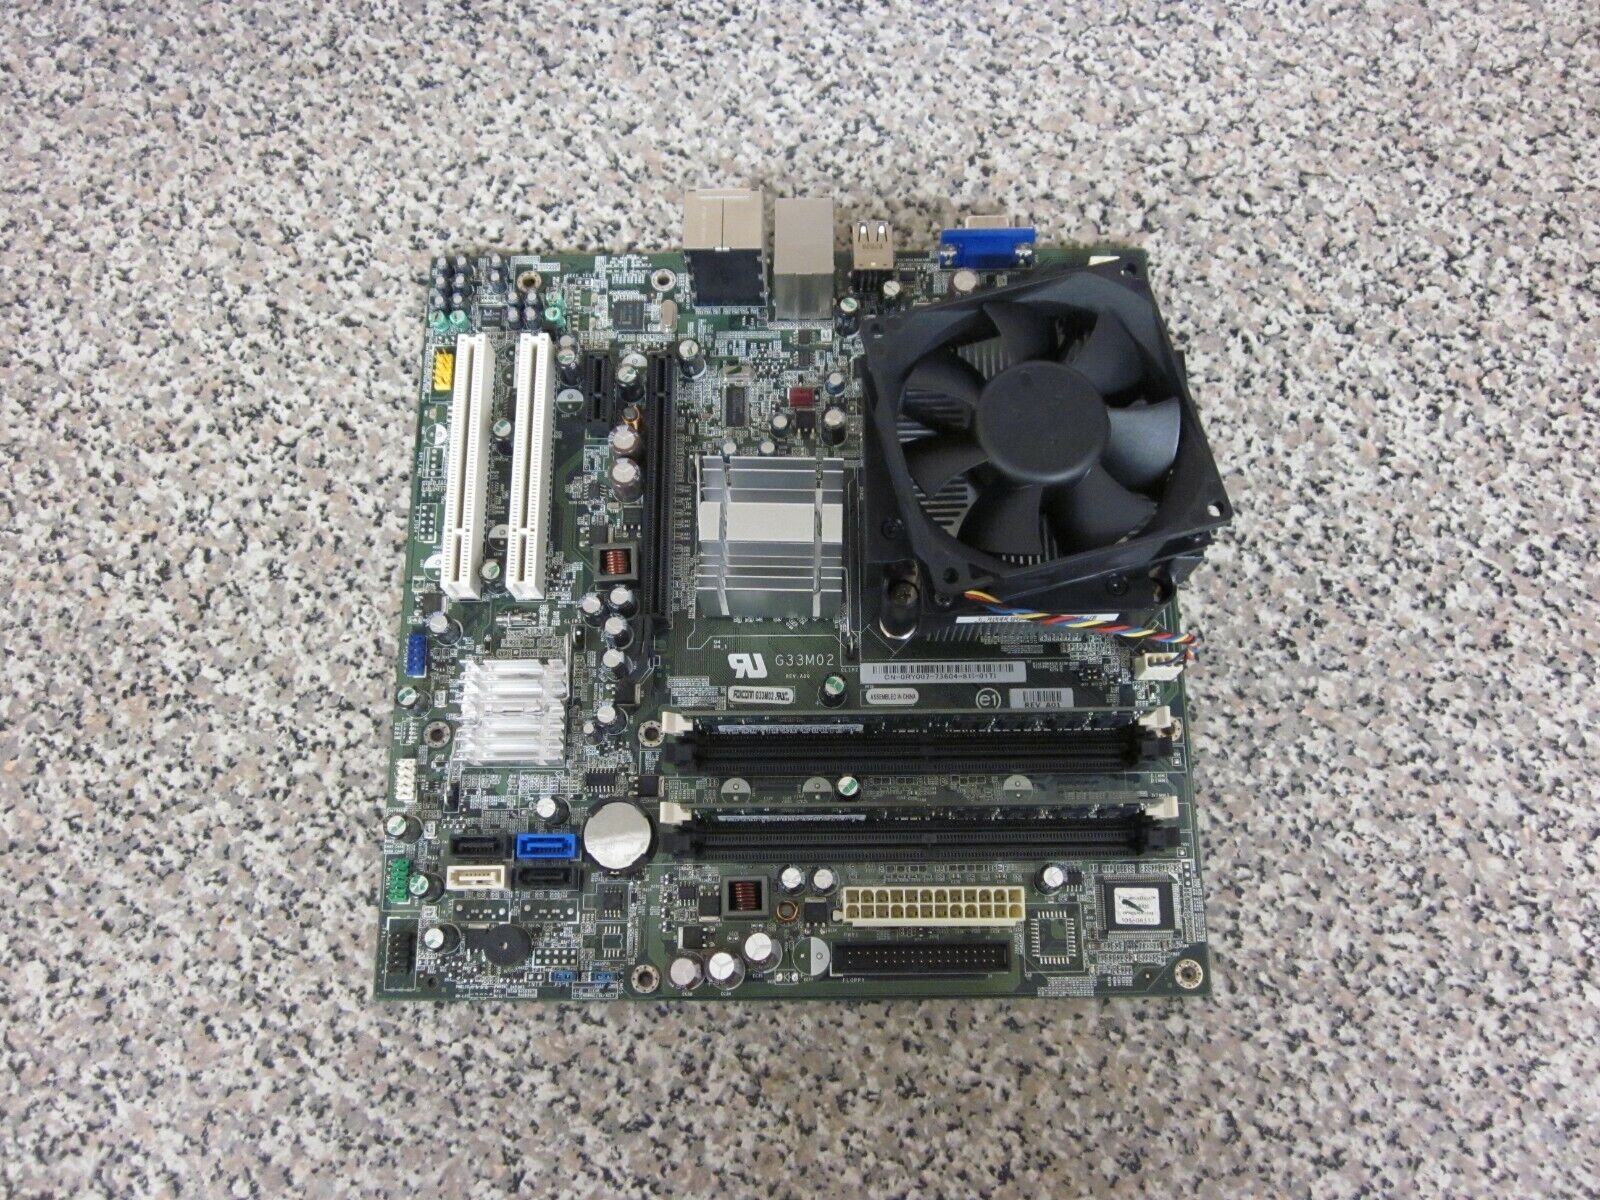 Dell Foxconn 0RY007 RY007 G33M02 Intel Core 2 Duo 2.2GHz CPU 1GB Ram Motherboard